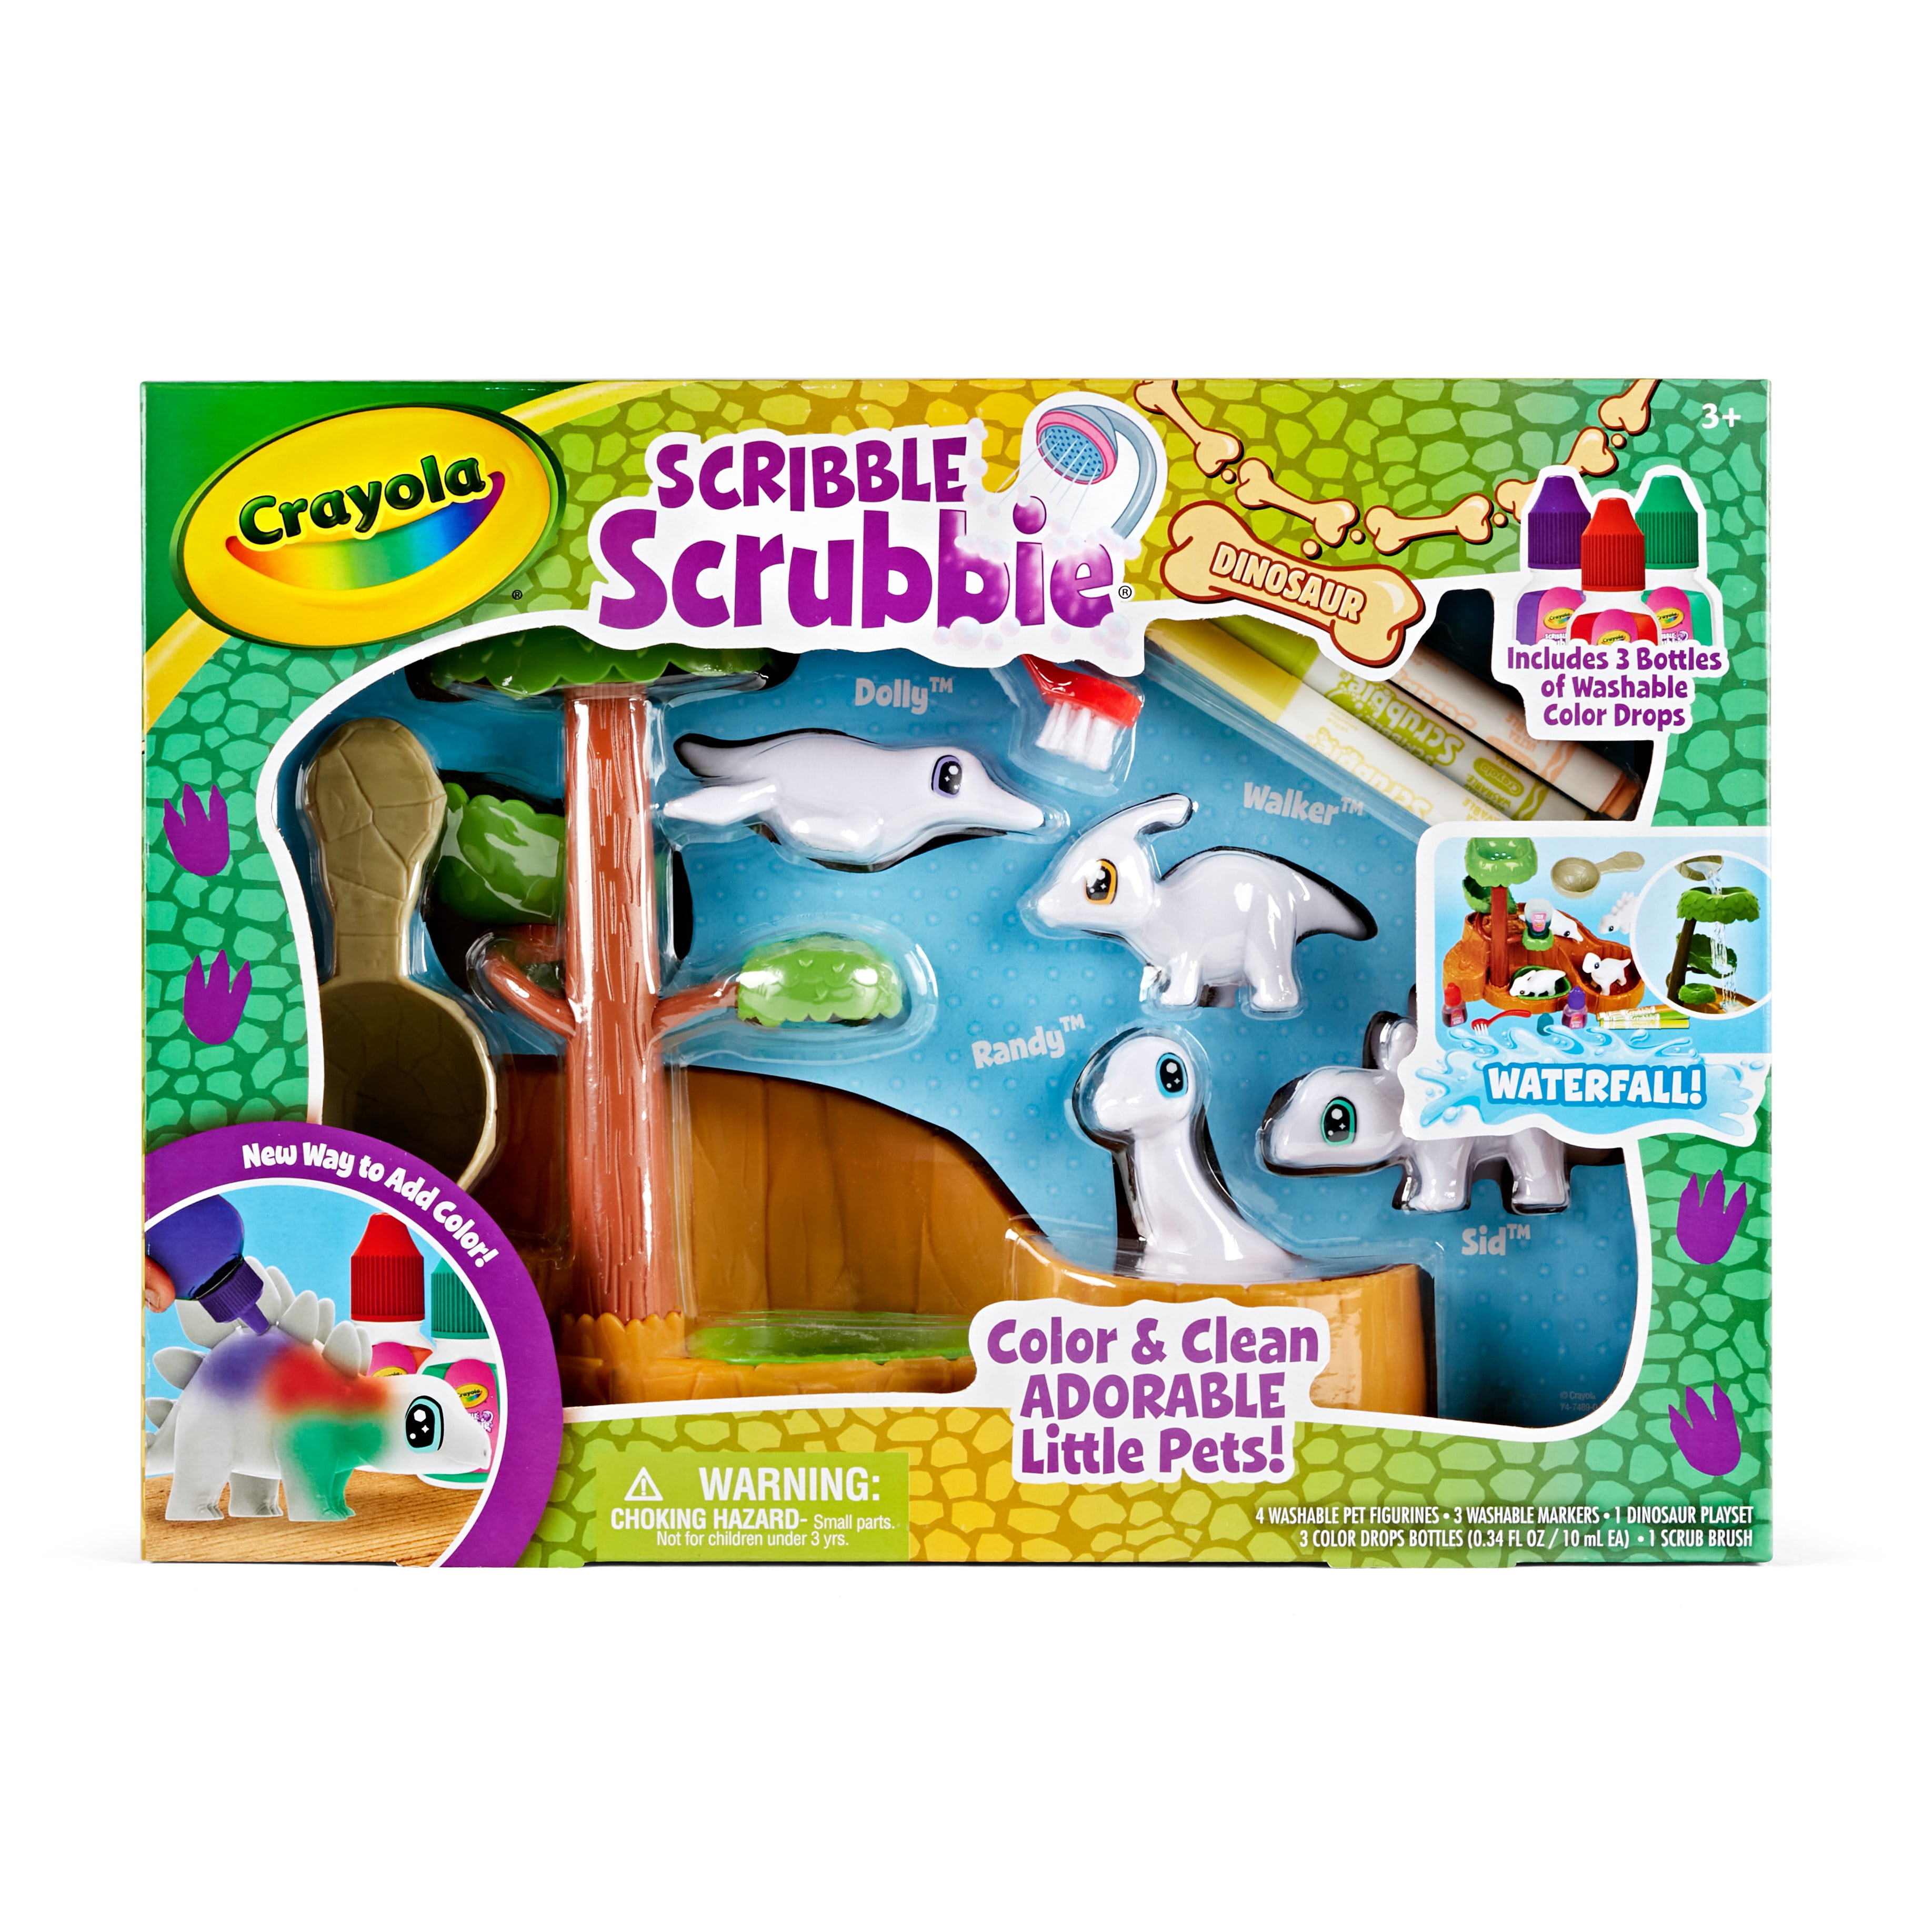 How to Make Scribble Scrubbie Color Drops  